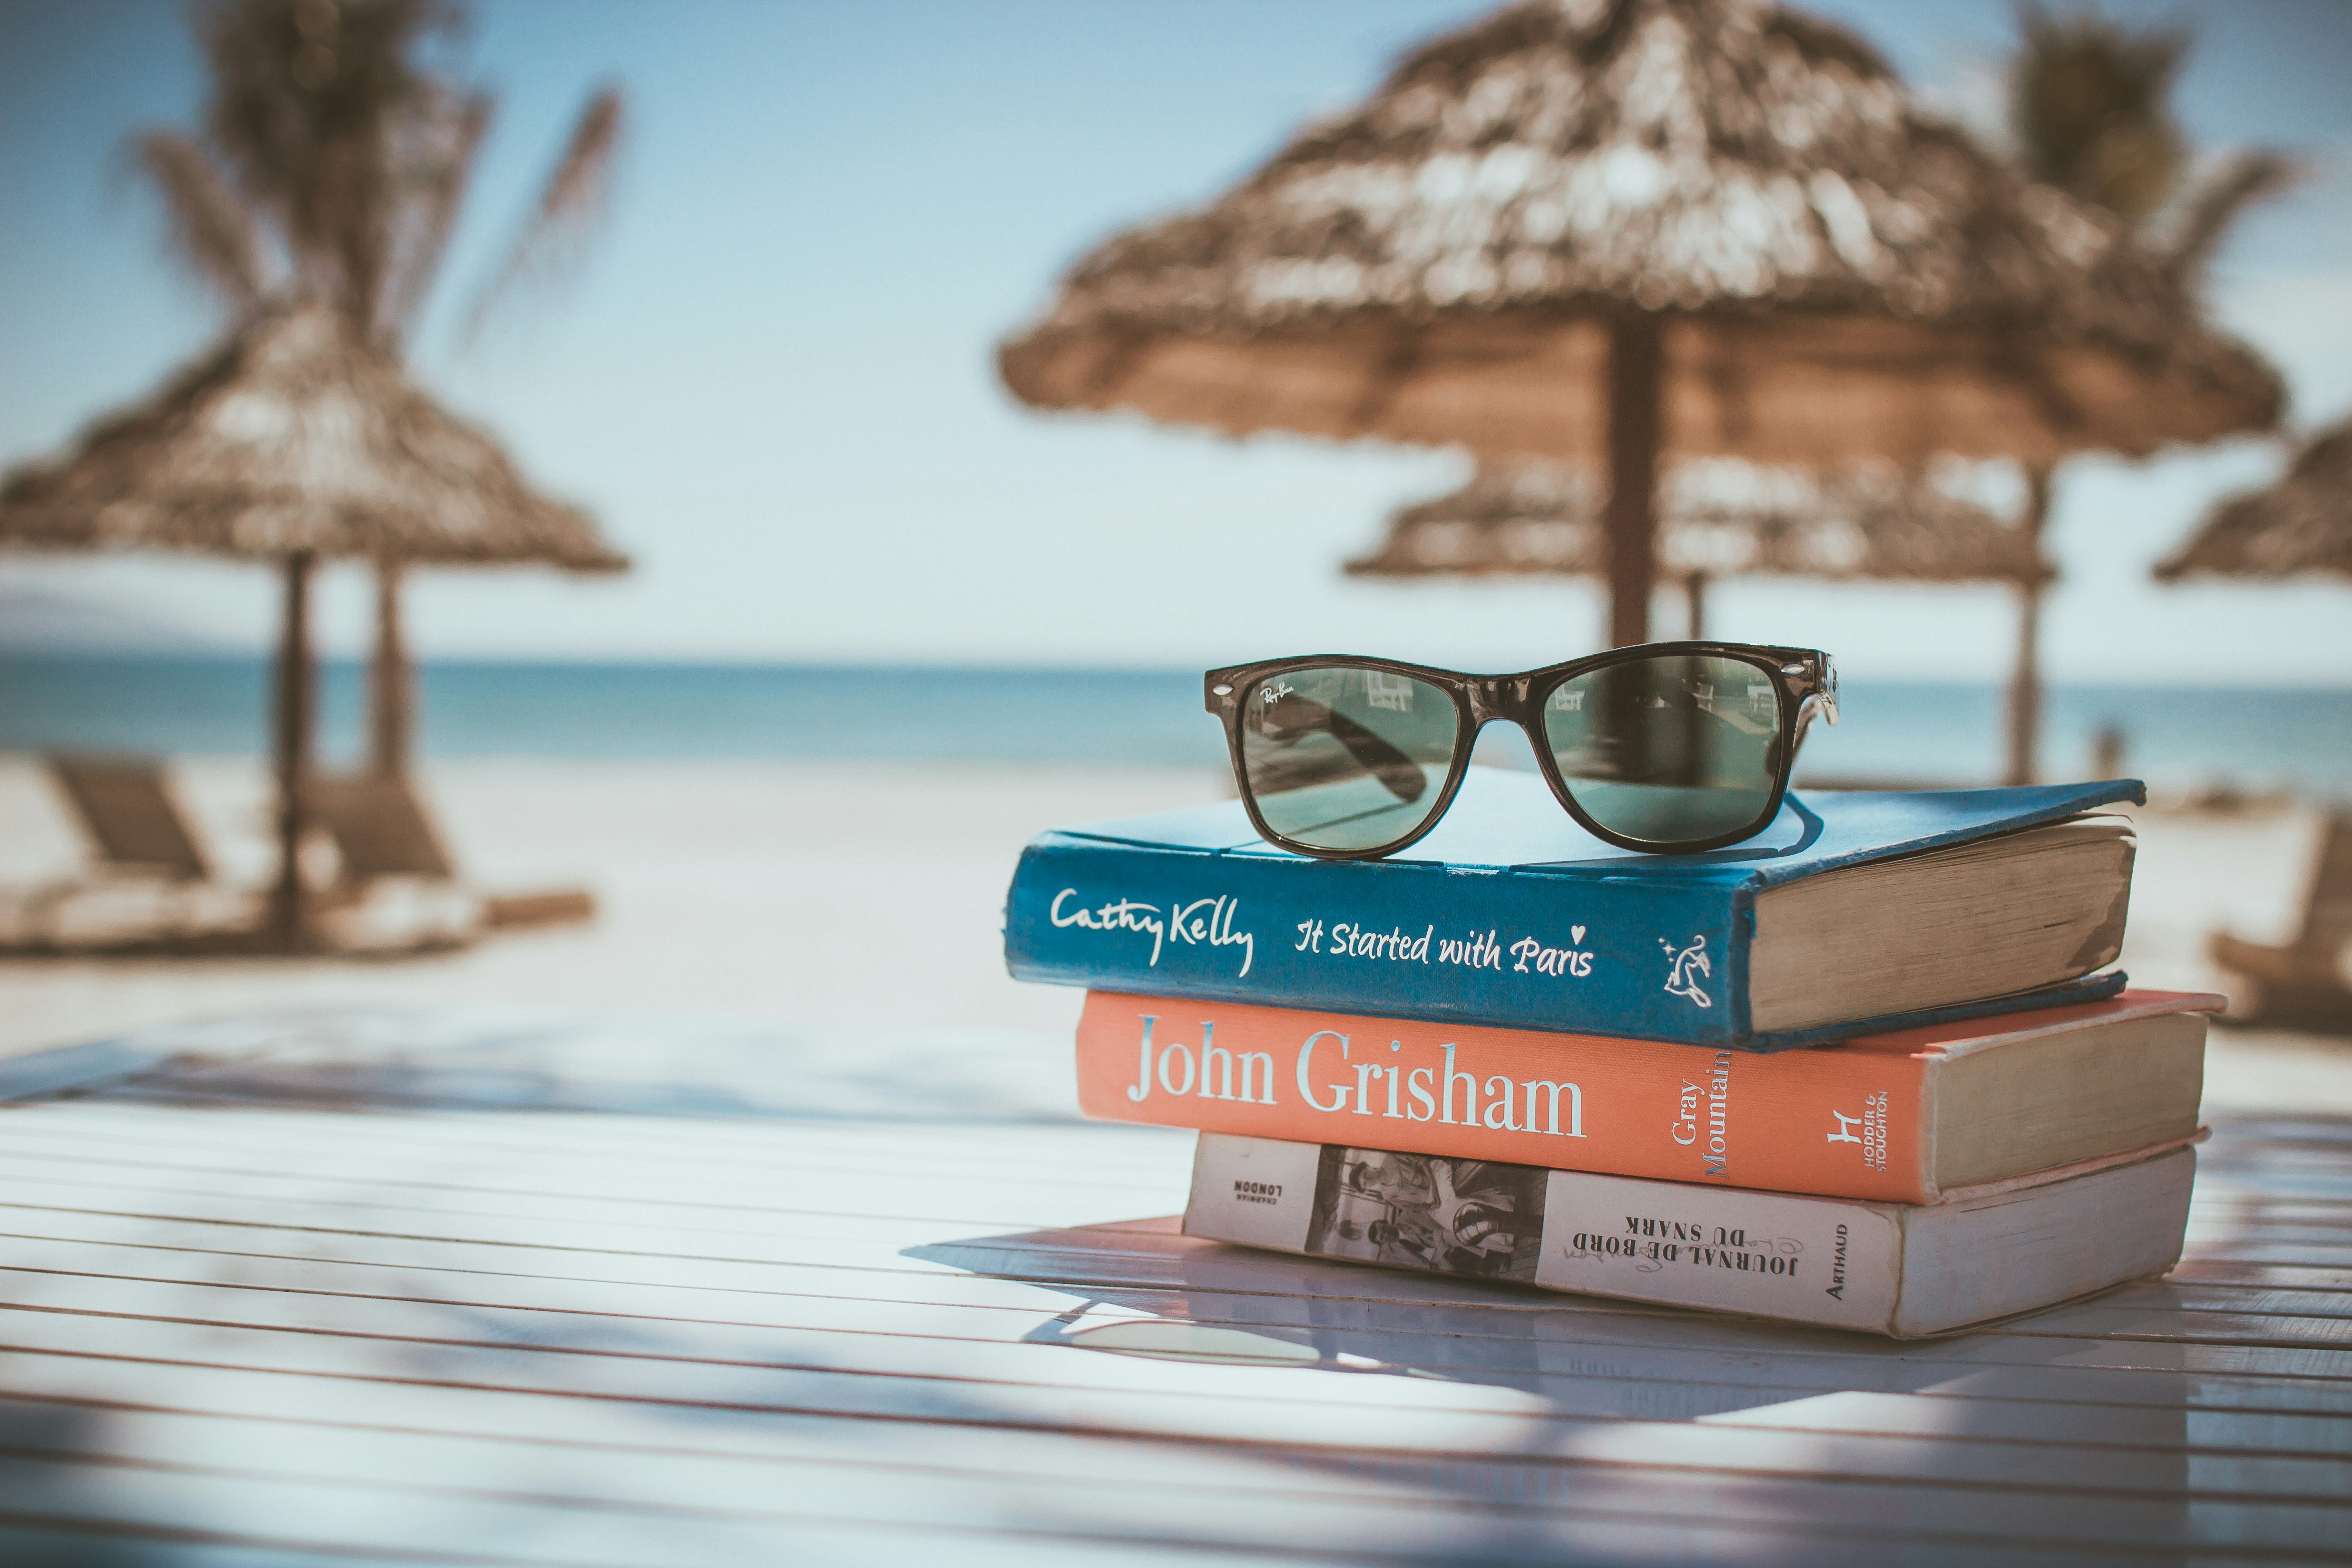 Books and glares on the beach